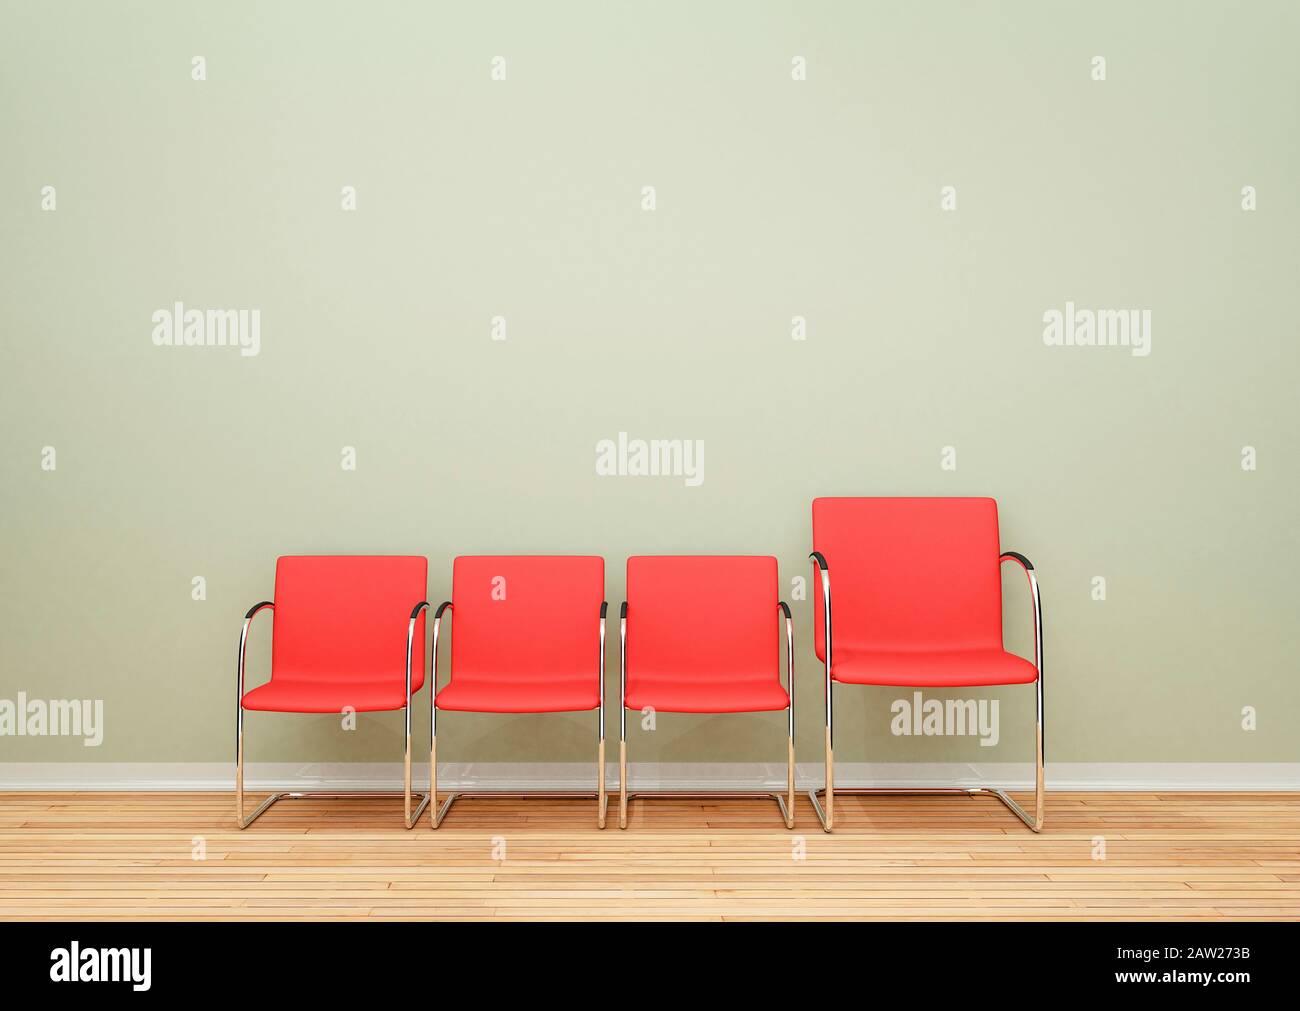 Three smaller chairs and one larger chair in a row in an empty room, difference concept Stock Photo